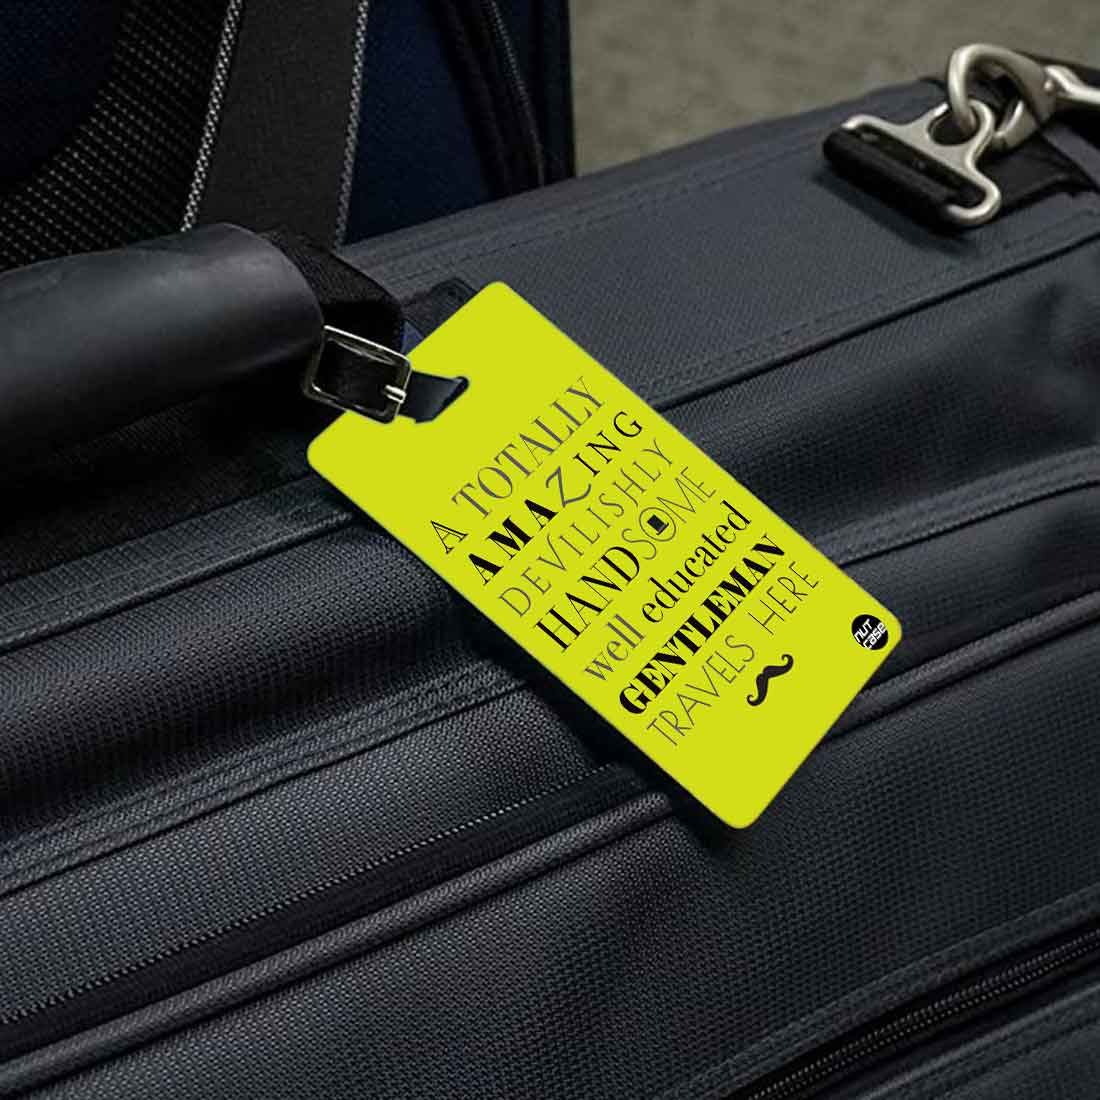 Customized Travel Luggage Tags with Your Name Set of 2 - Travels